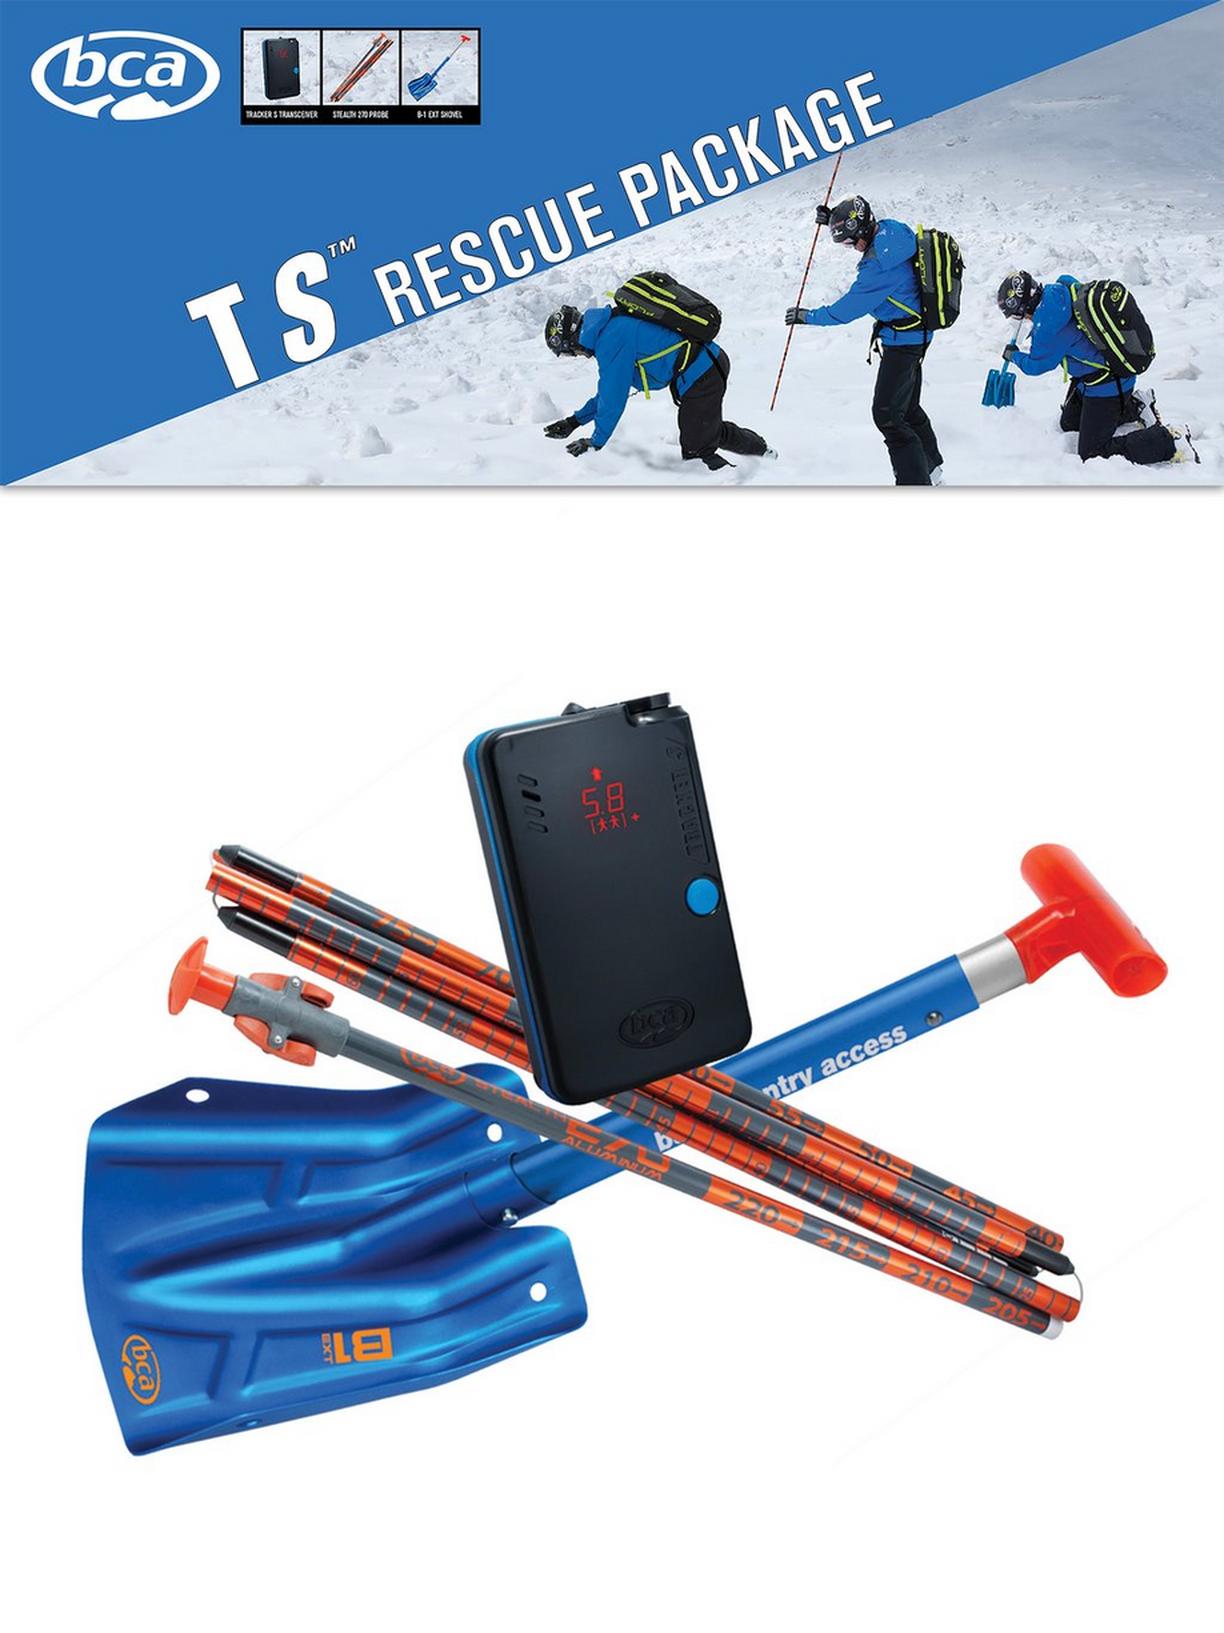 T S AVALANCHE RESCUE PACKAGE BCA